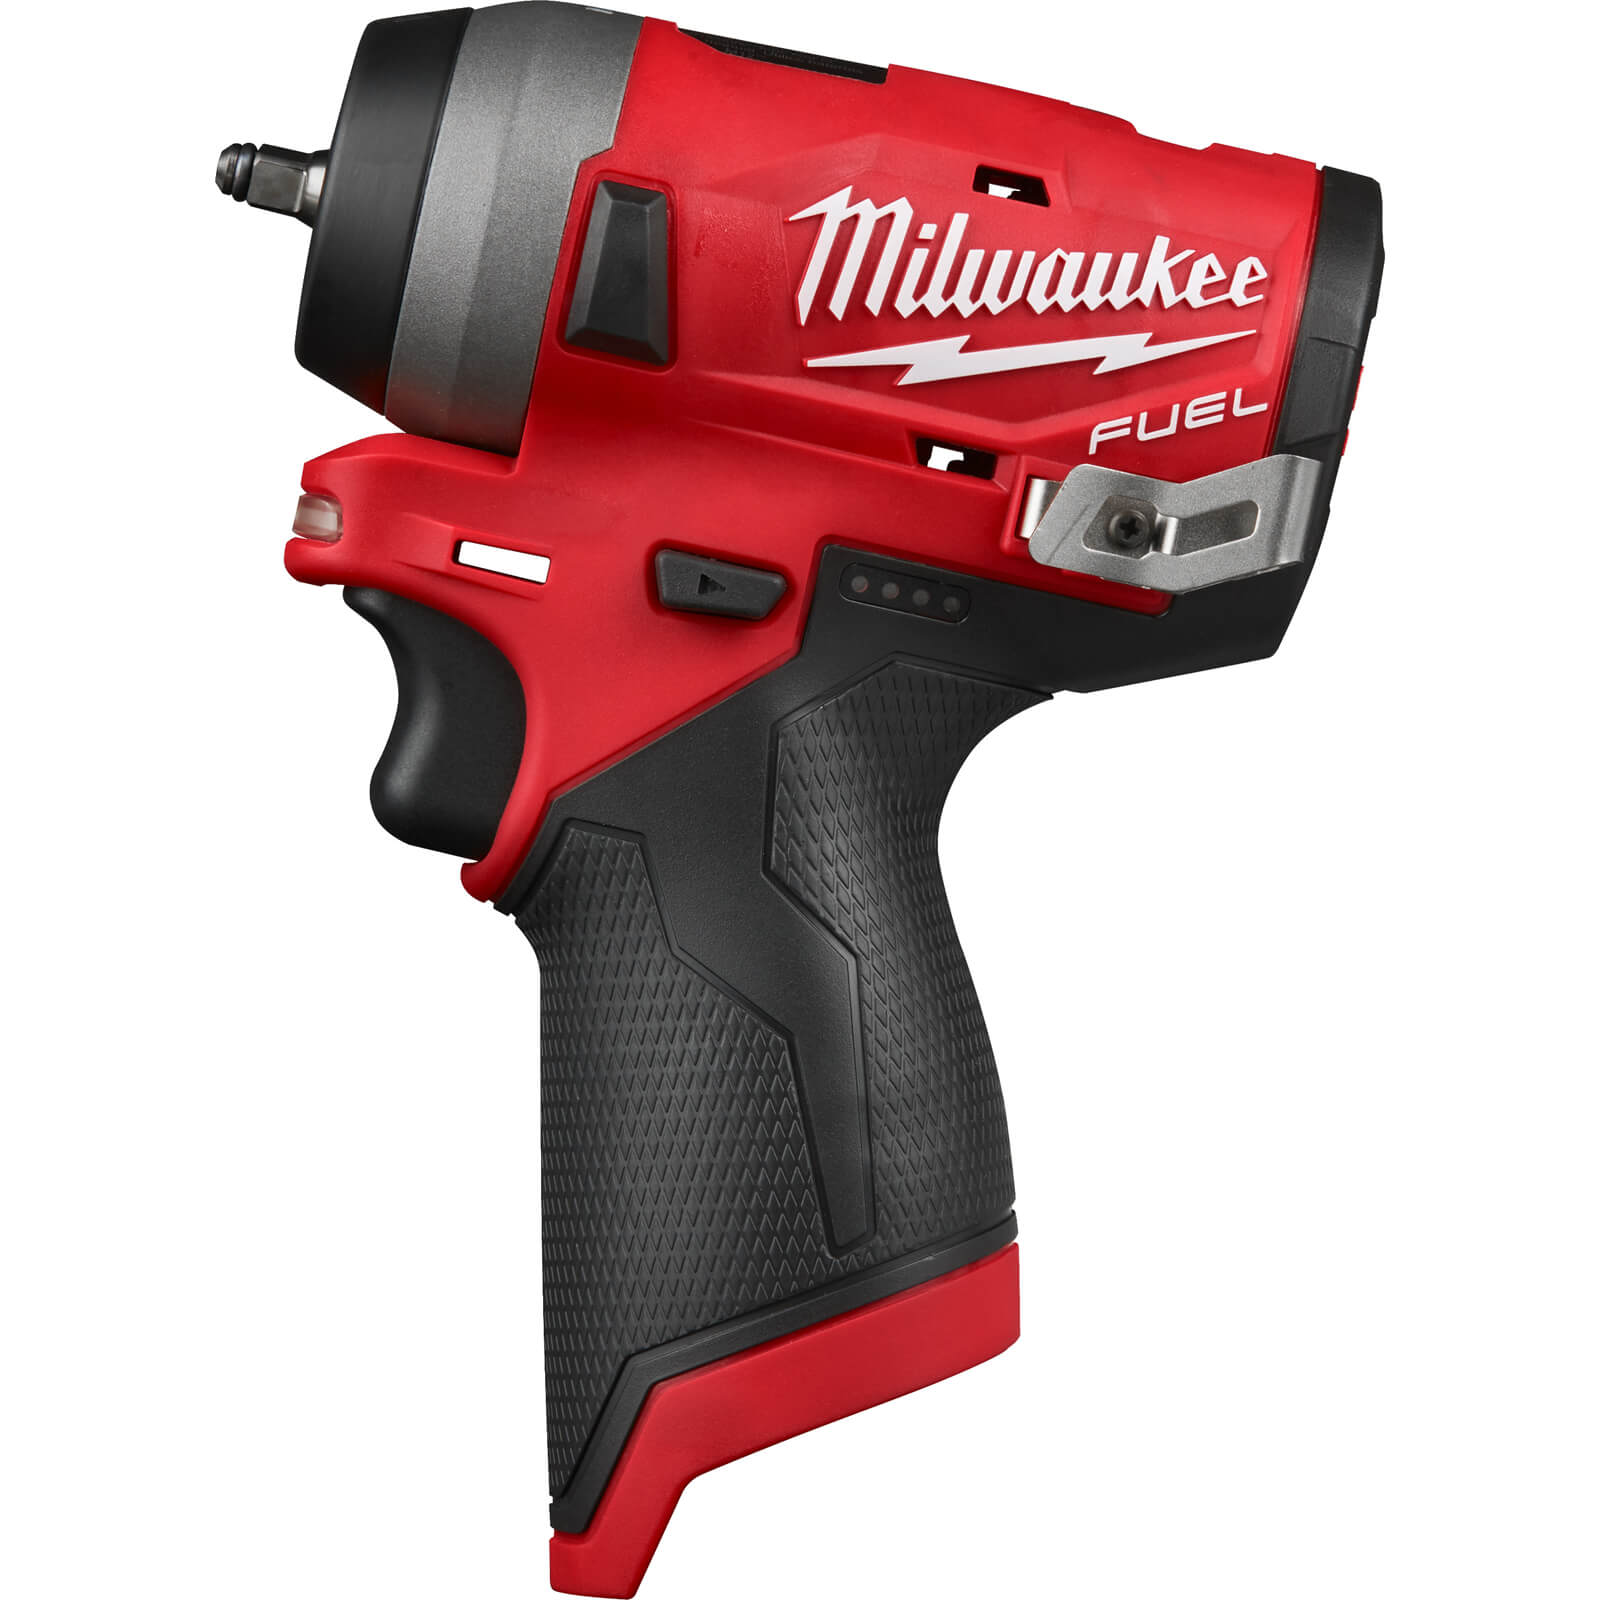 Image of Milwaukee M12 FIW14 Fuel 12v Cordless Brushless 1/2" Drive Impact Wrench No Batteries No Charger No Case